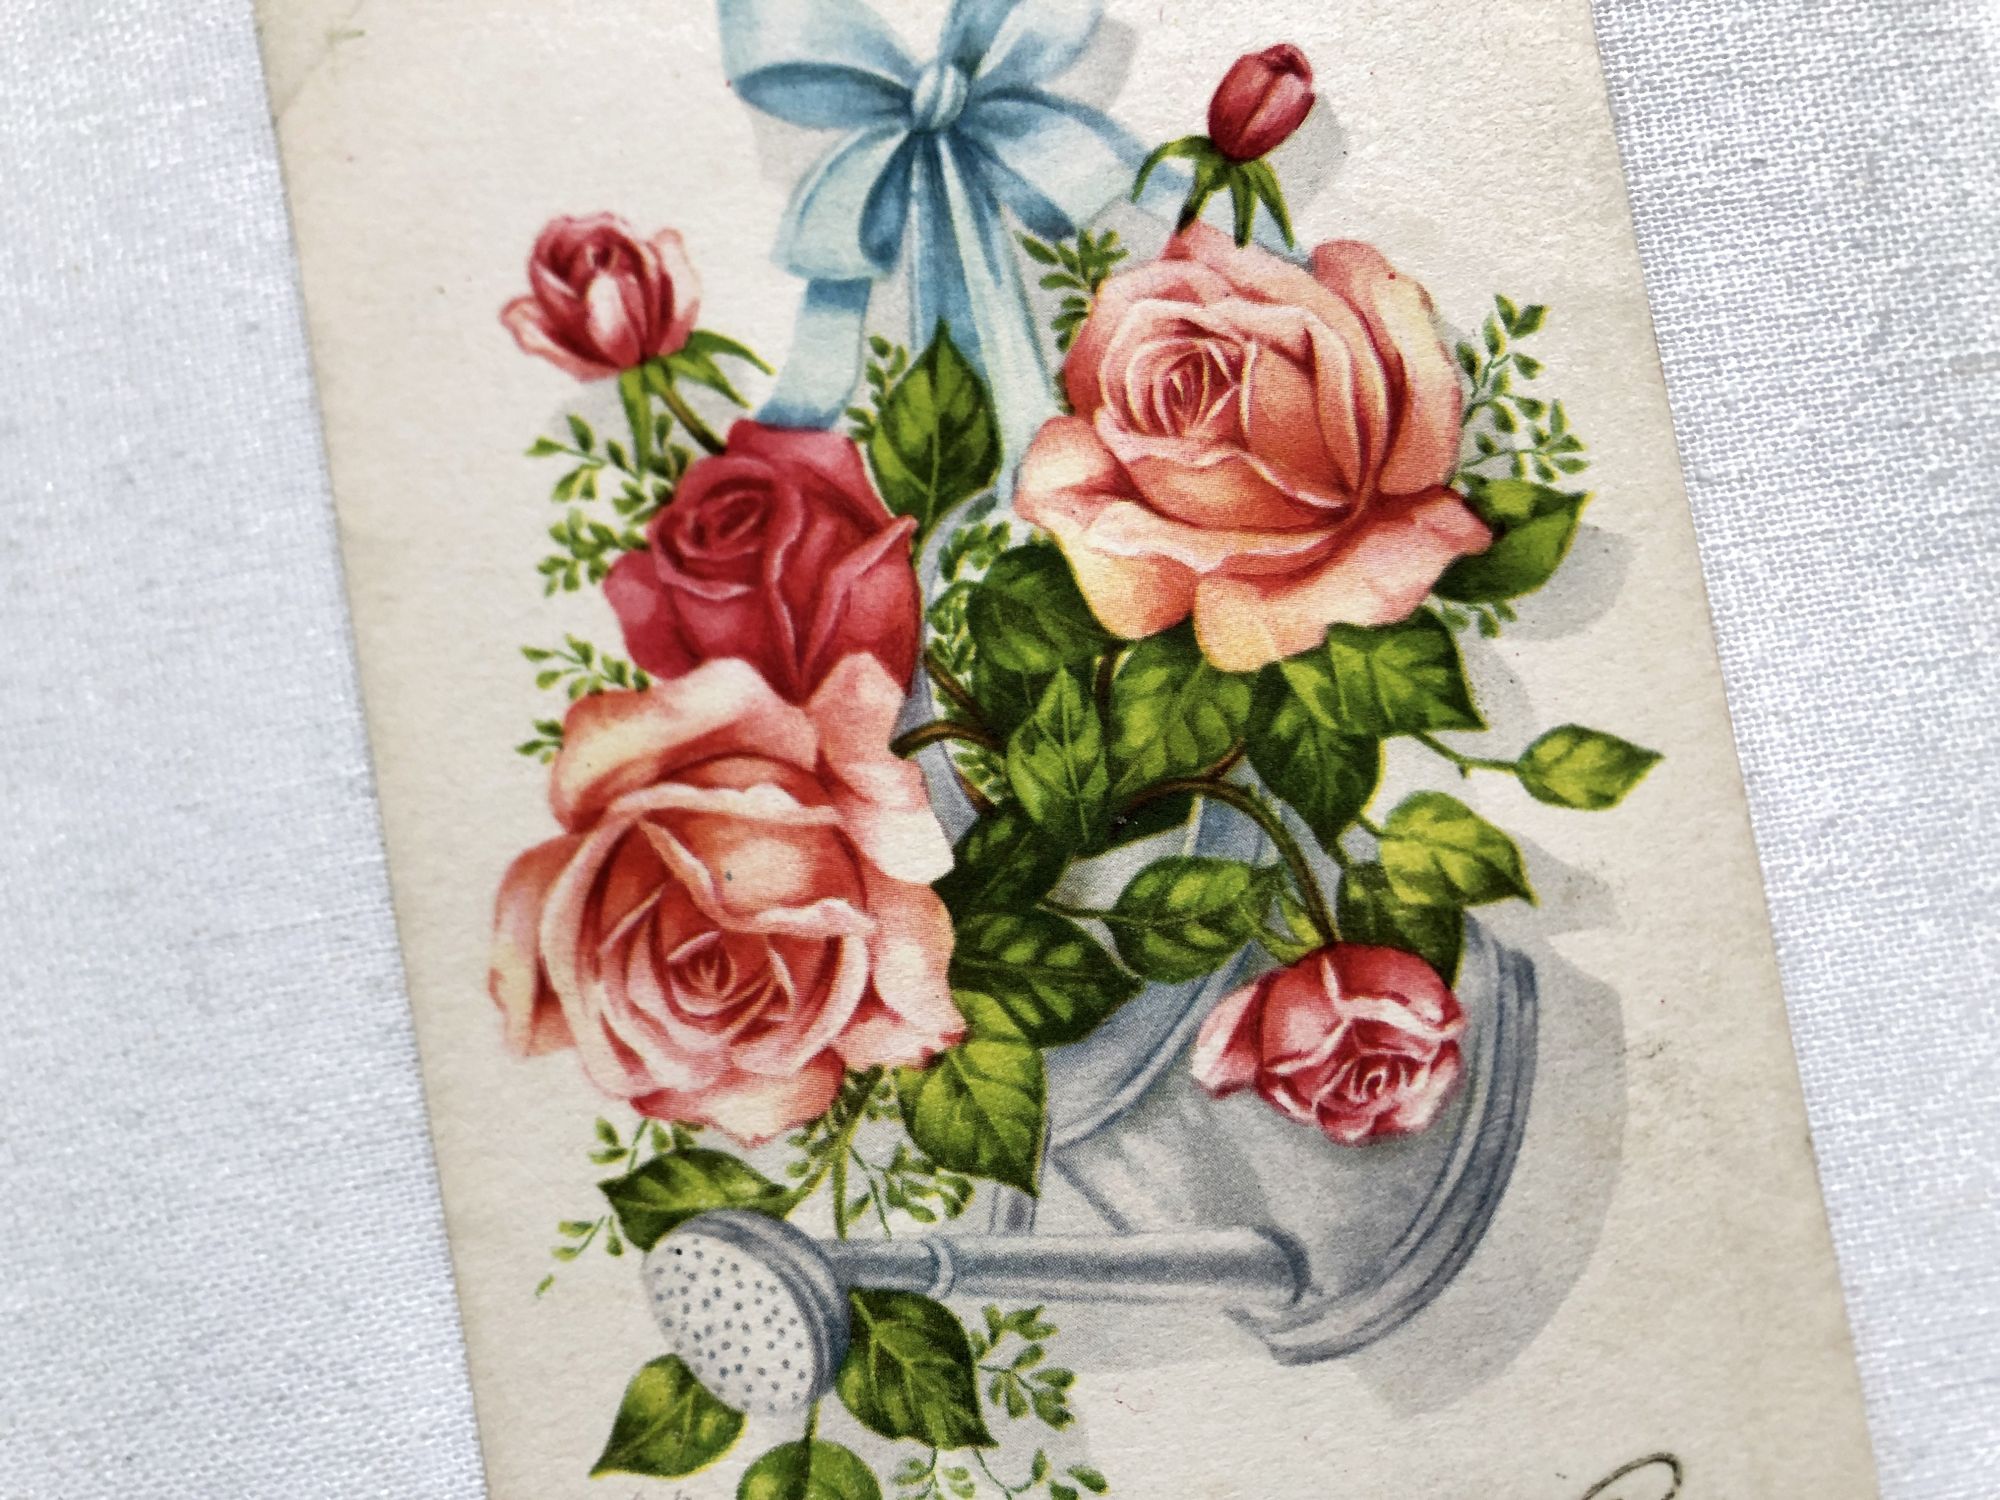 Vintage French postcard with a bouquet of roses from 1950s